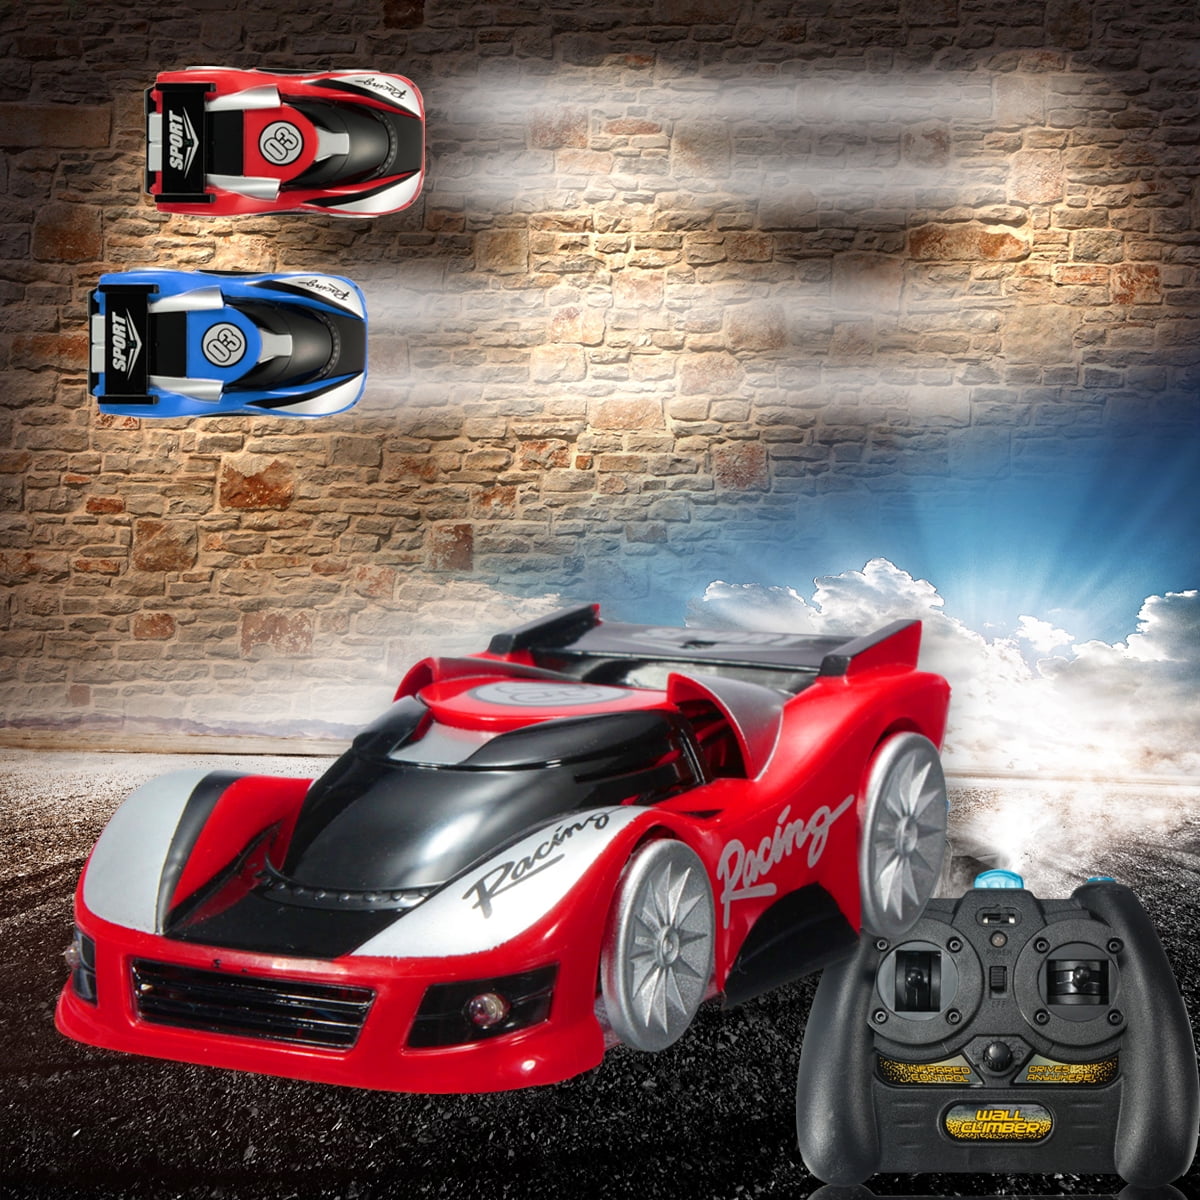 remote control car for 7 year old